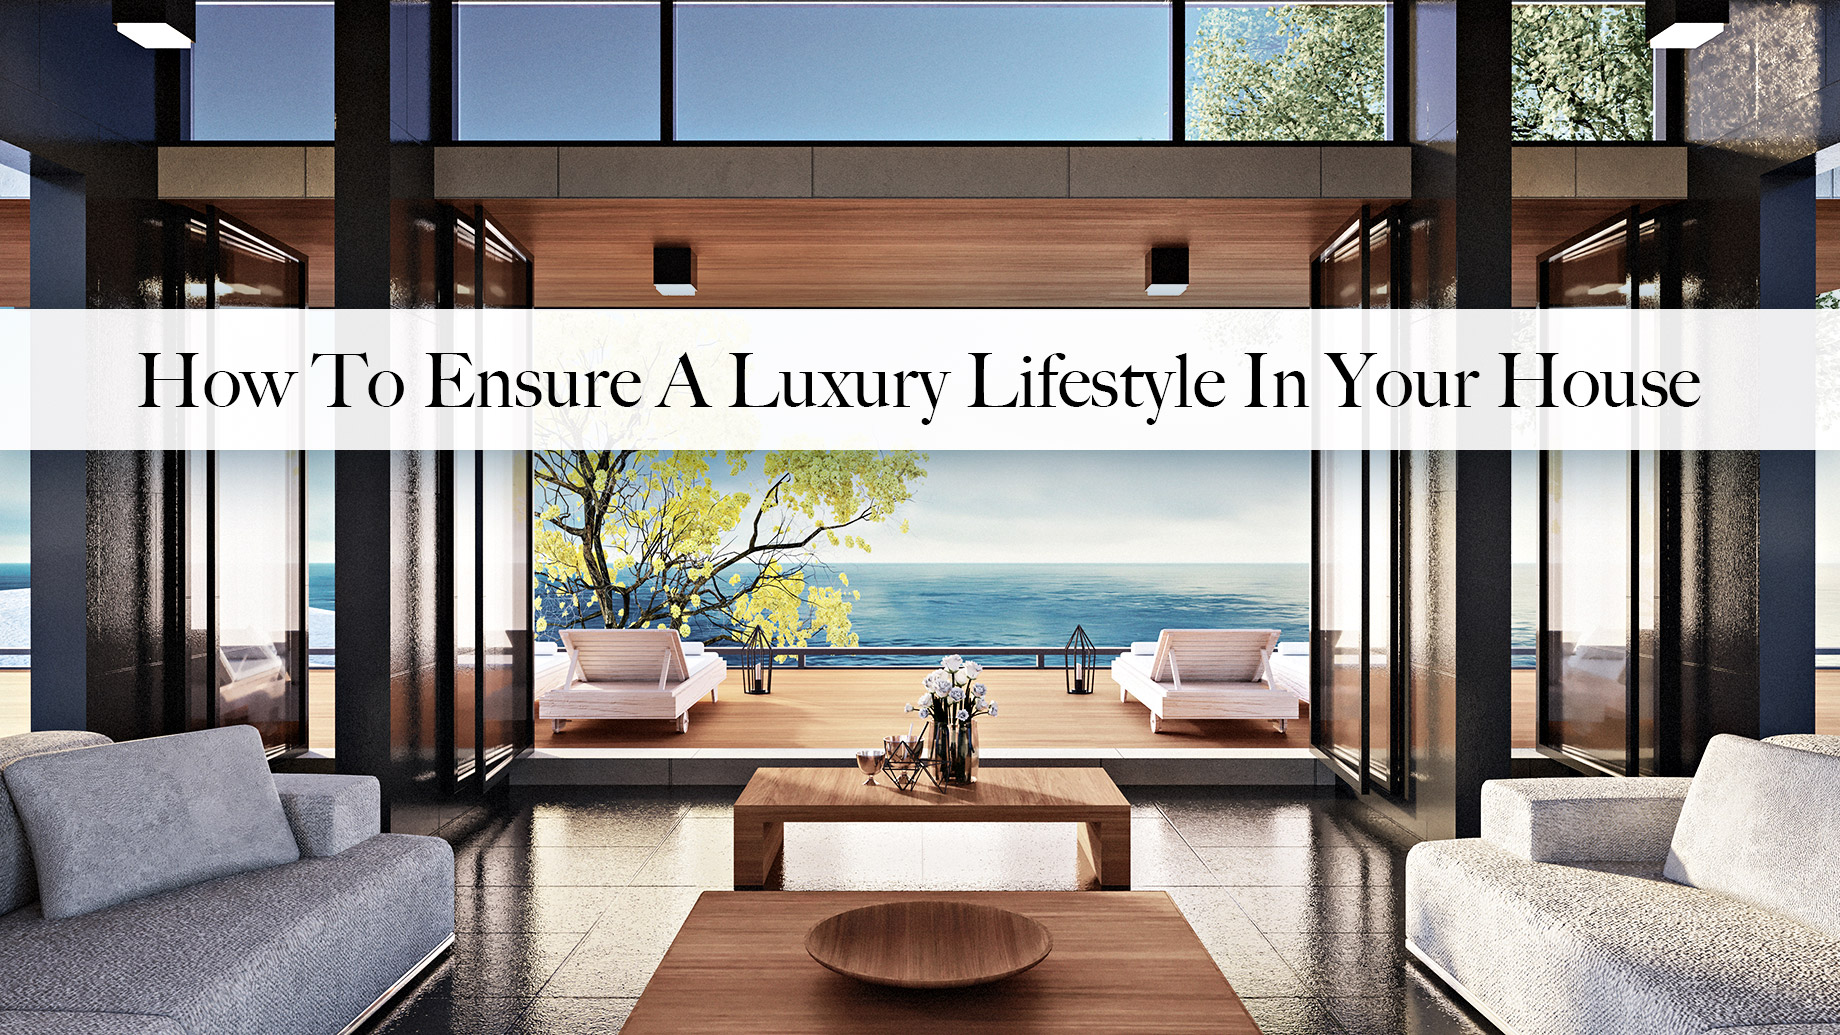 How To Ensure A Luxury Lifestyle In Your House